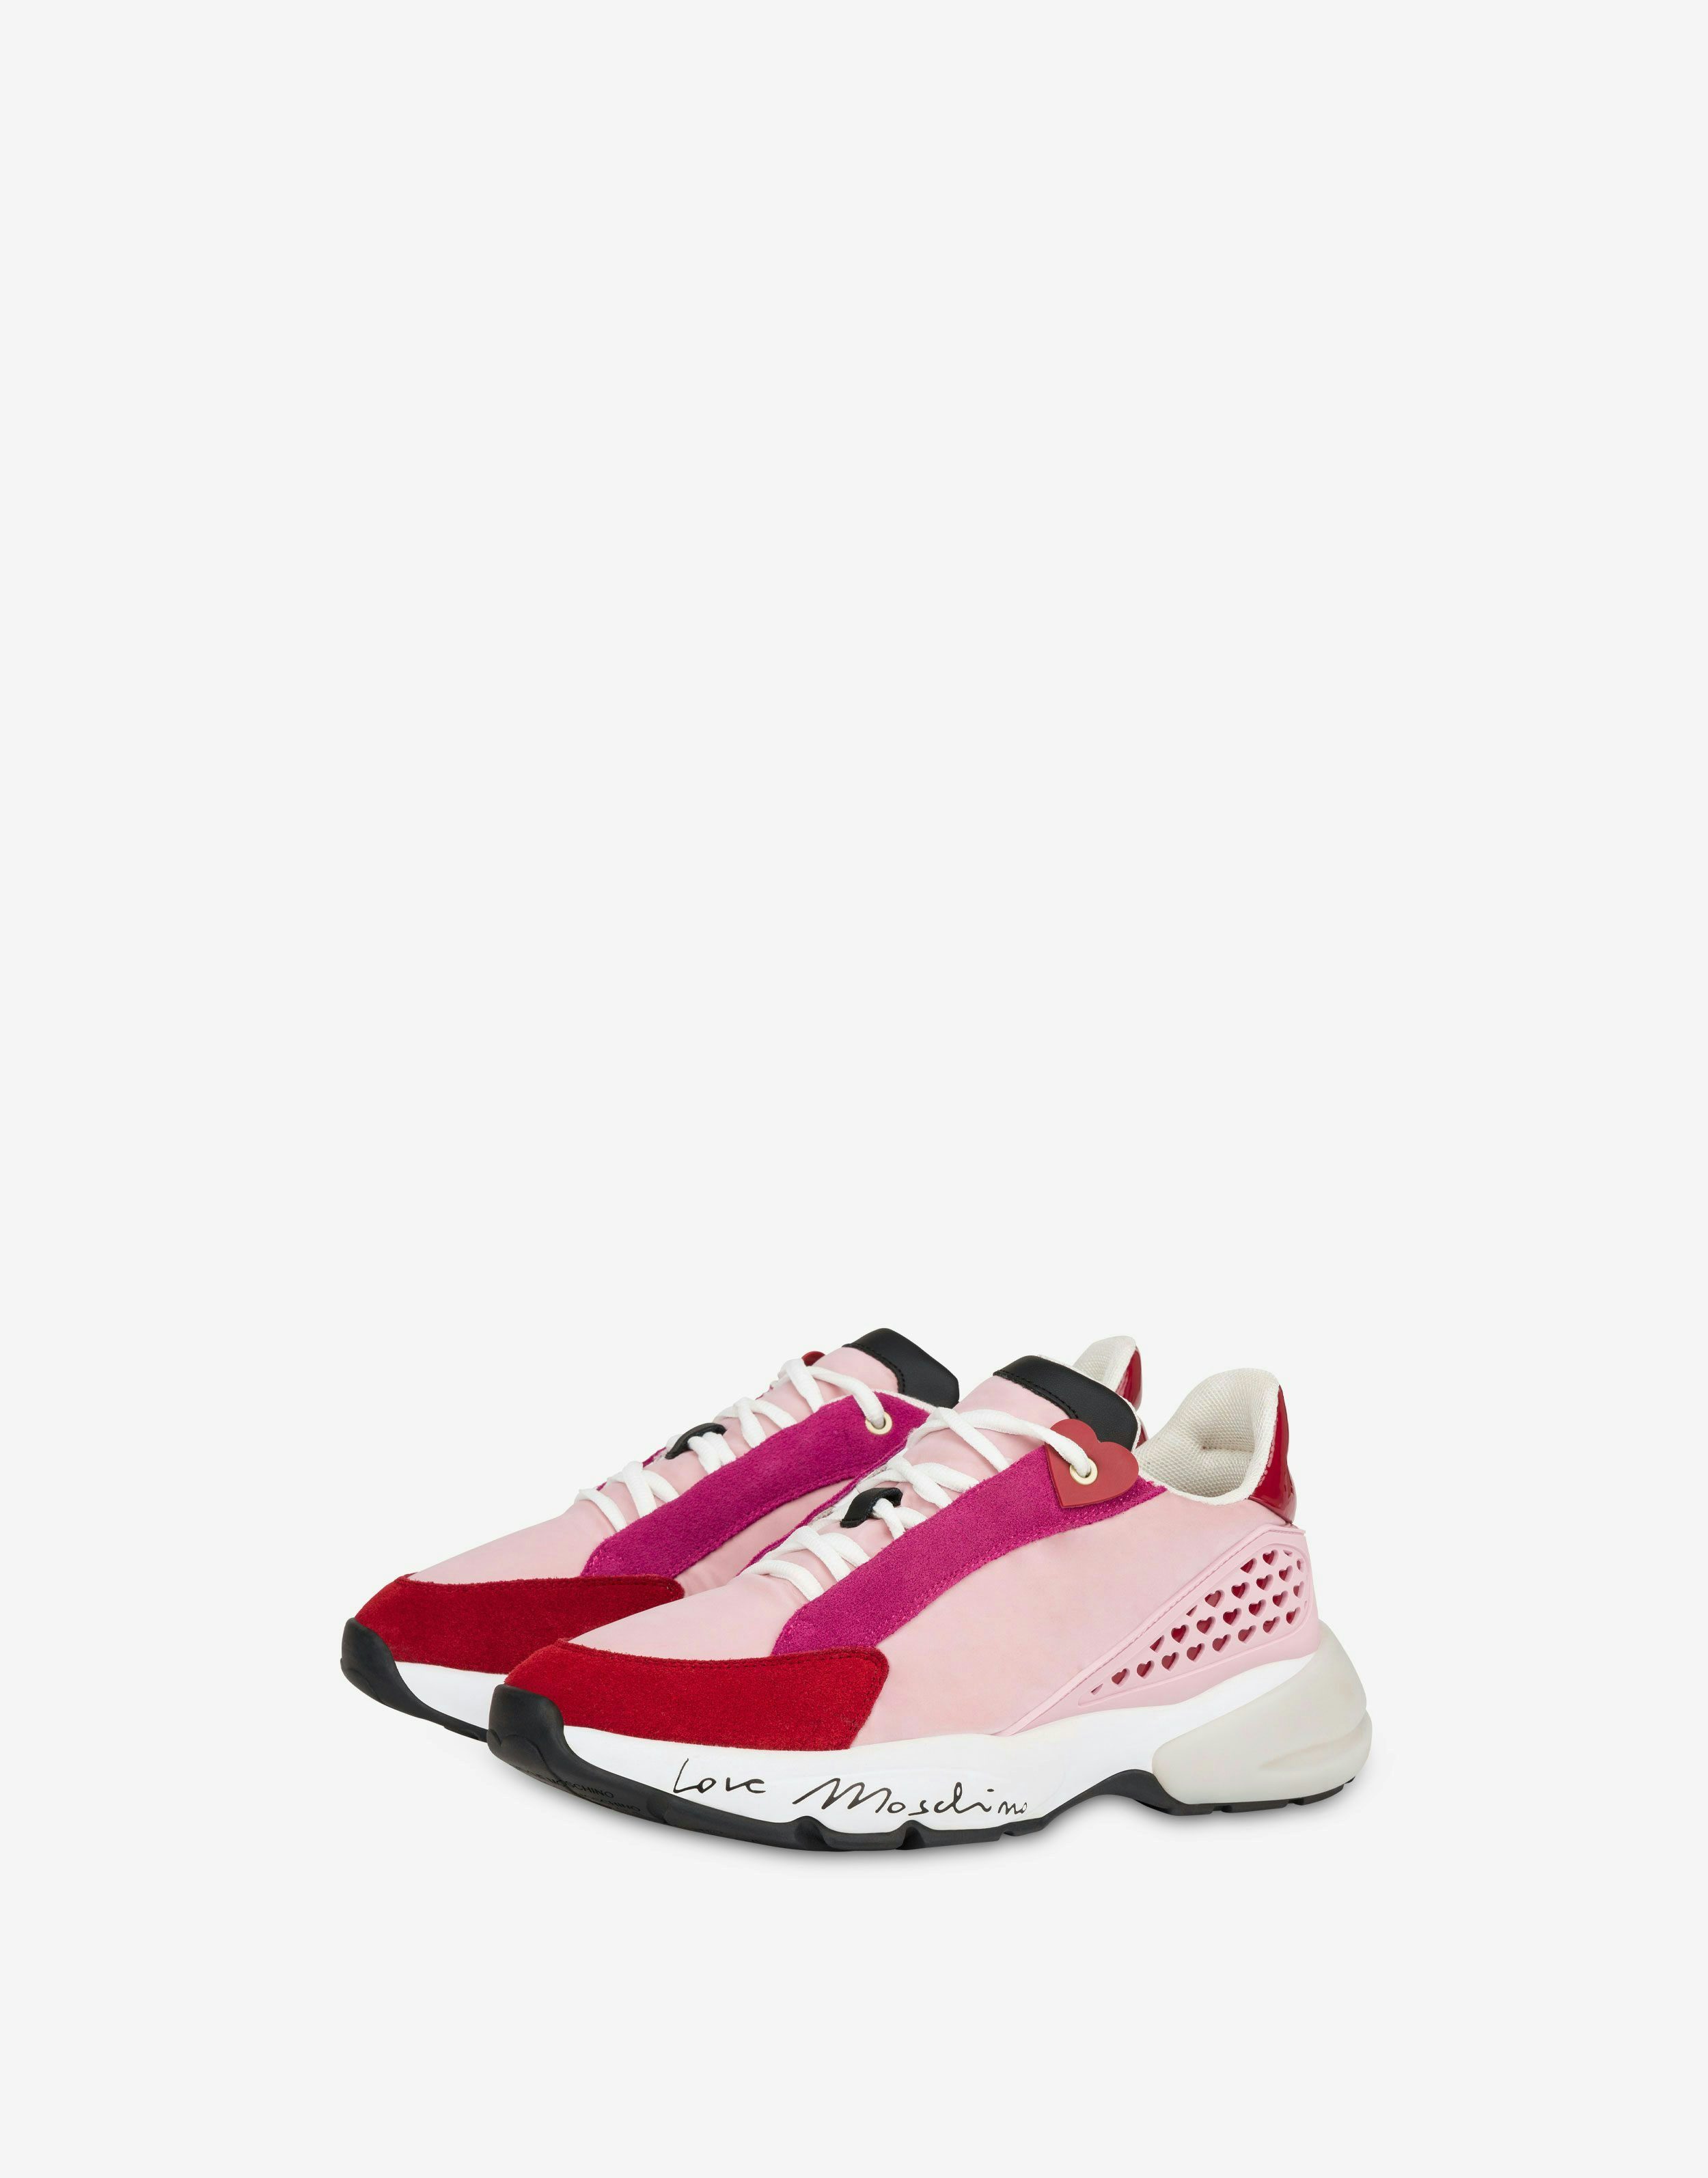 Moschino LOVE MOSCHINO WOMEN SNEAKERS IN RED STYLE JA15322G1EIN2_50A 